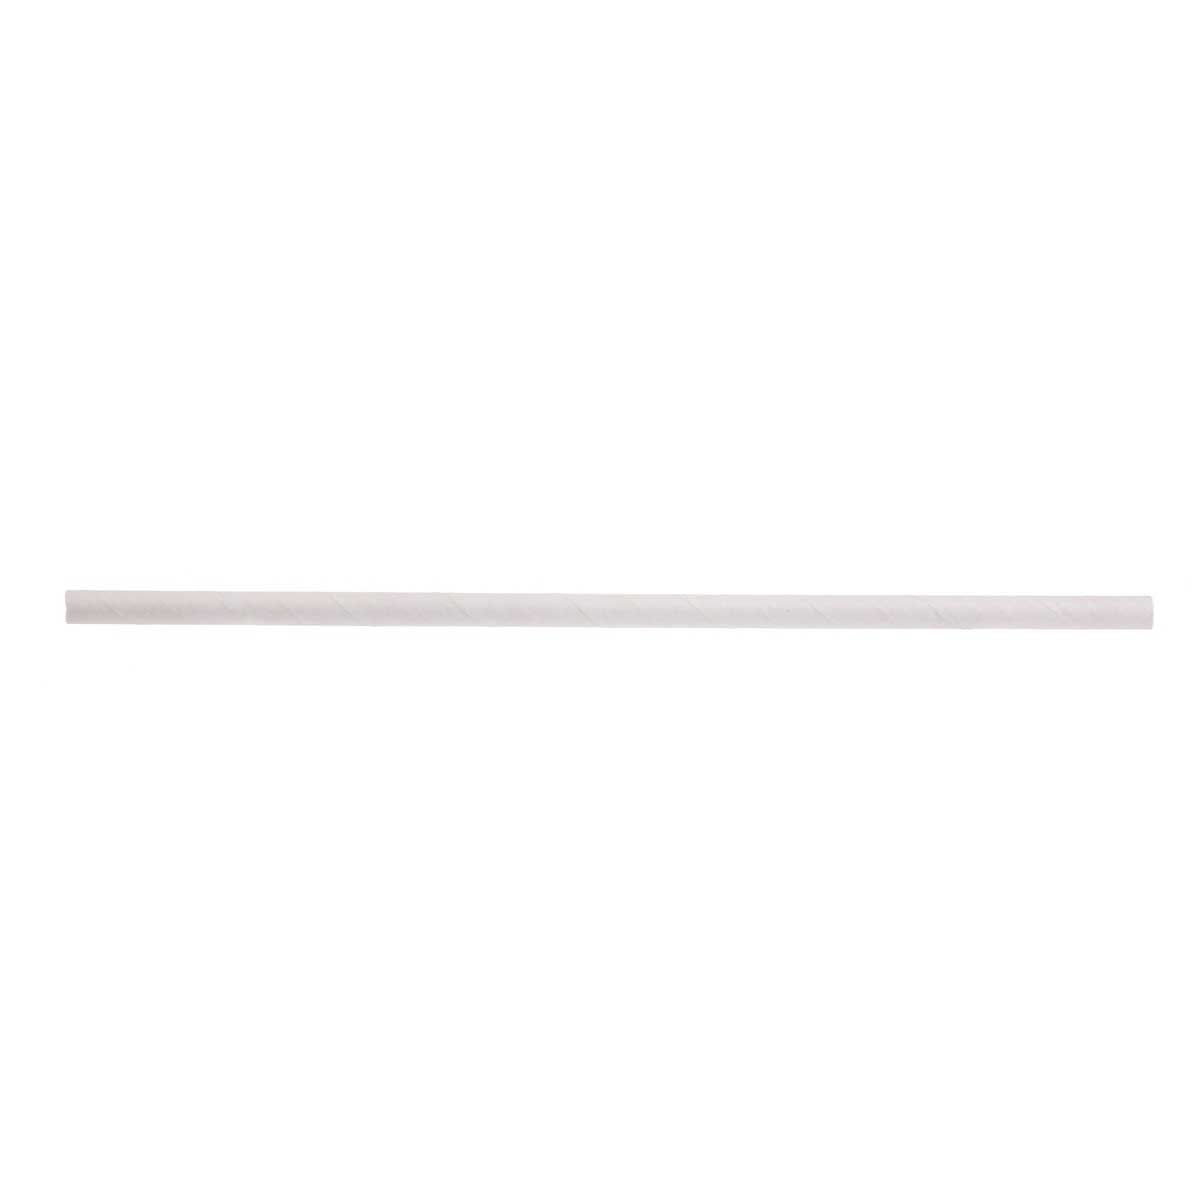 Tablecraft Solid White Individually Wrapped Paper Straw, 7.75 inch - 500  count per pack -- 6 packs per case